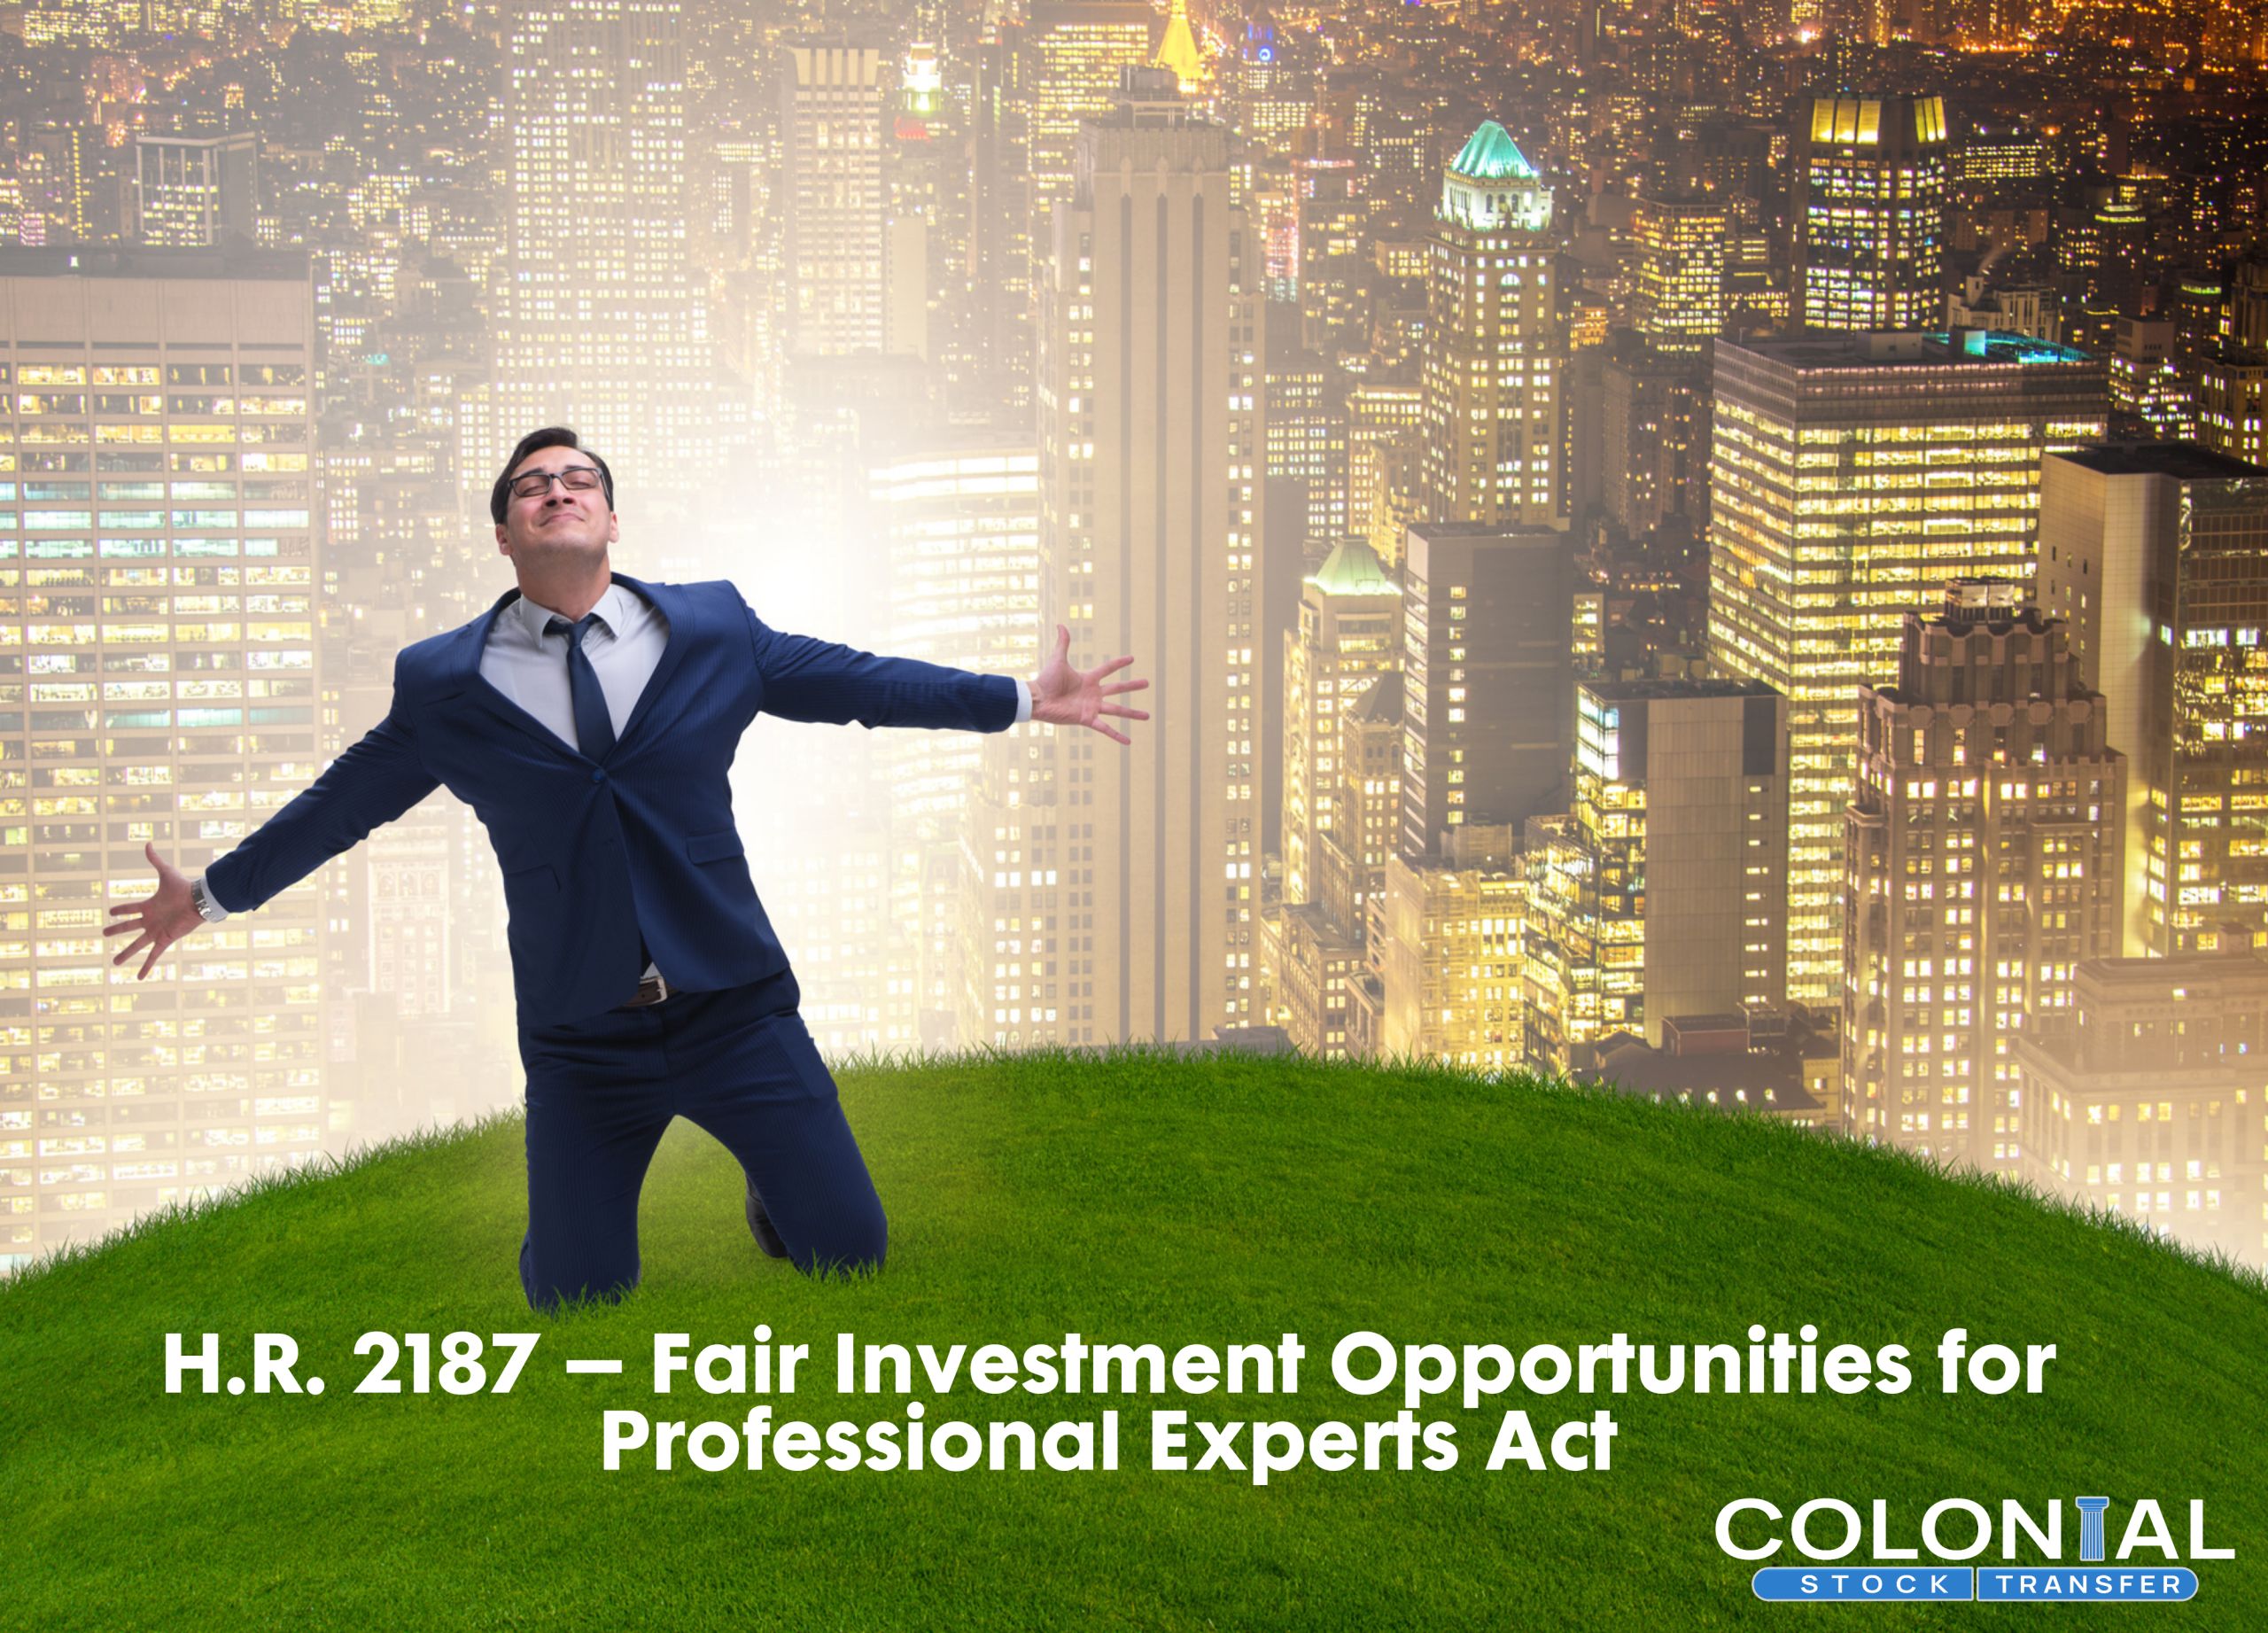 H.R. 2187 – Fair Investment Opportunities for Professional Experts Act